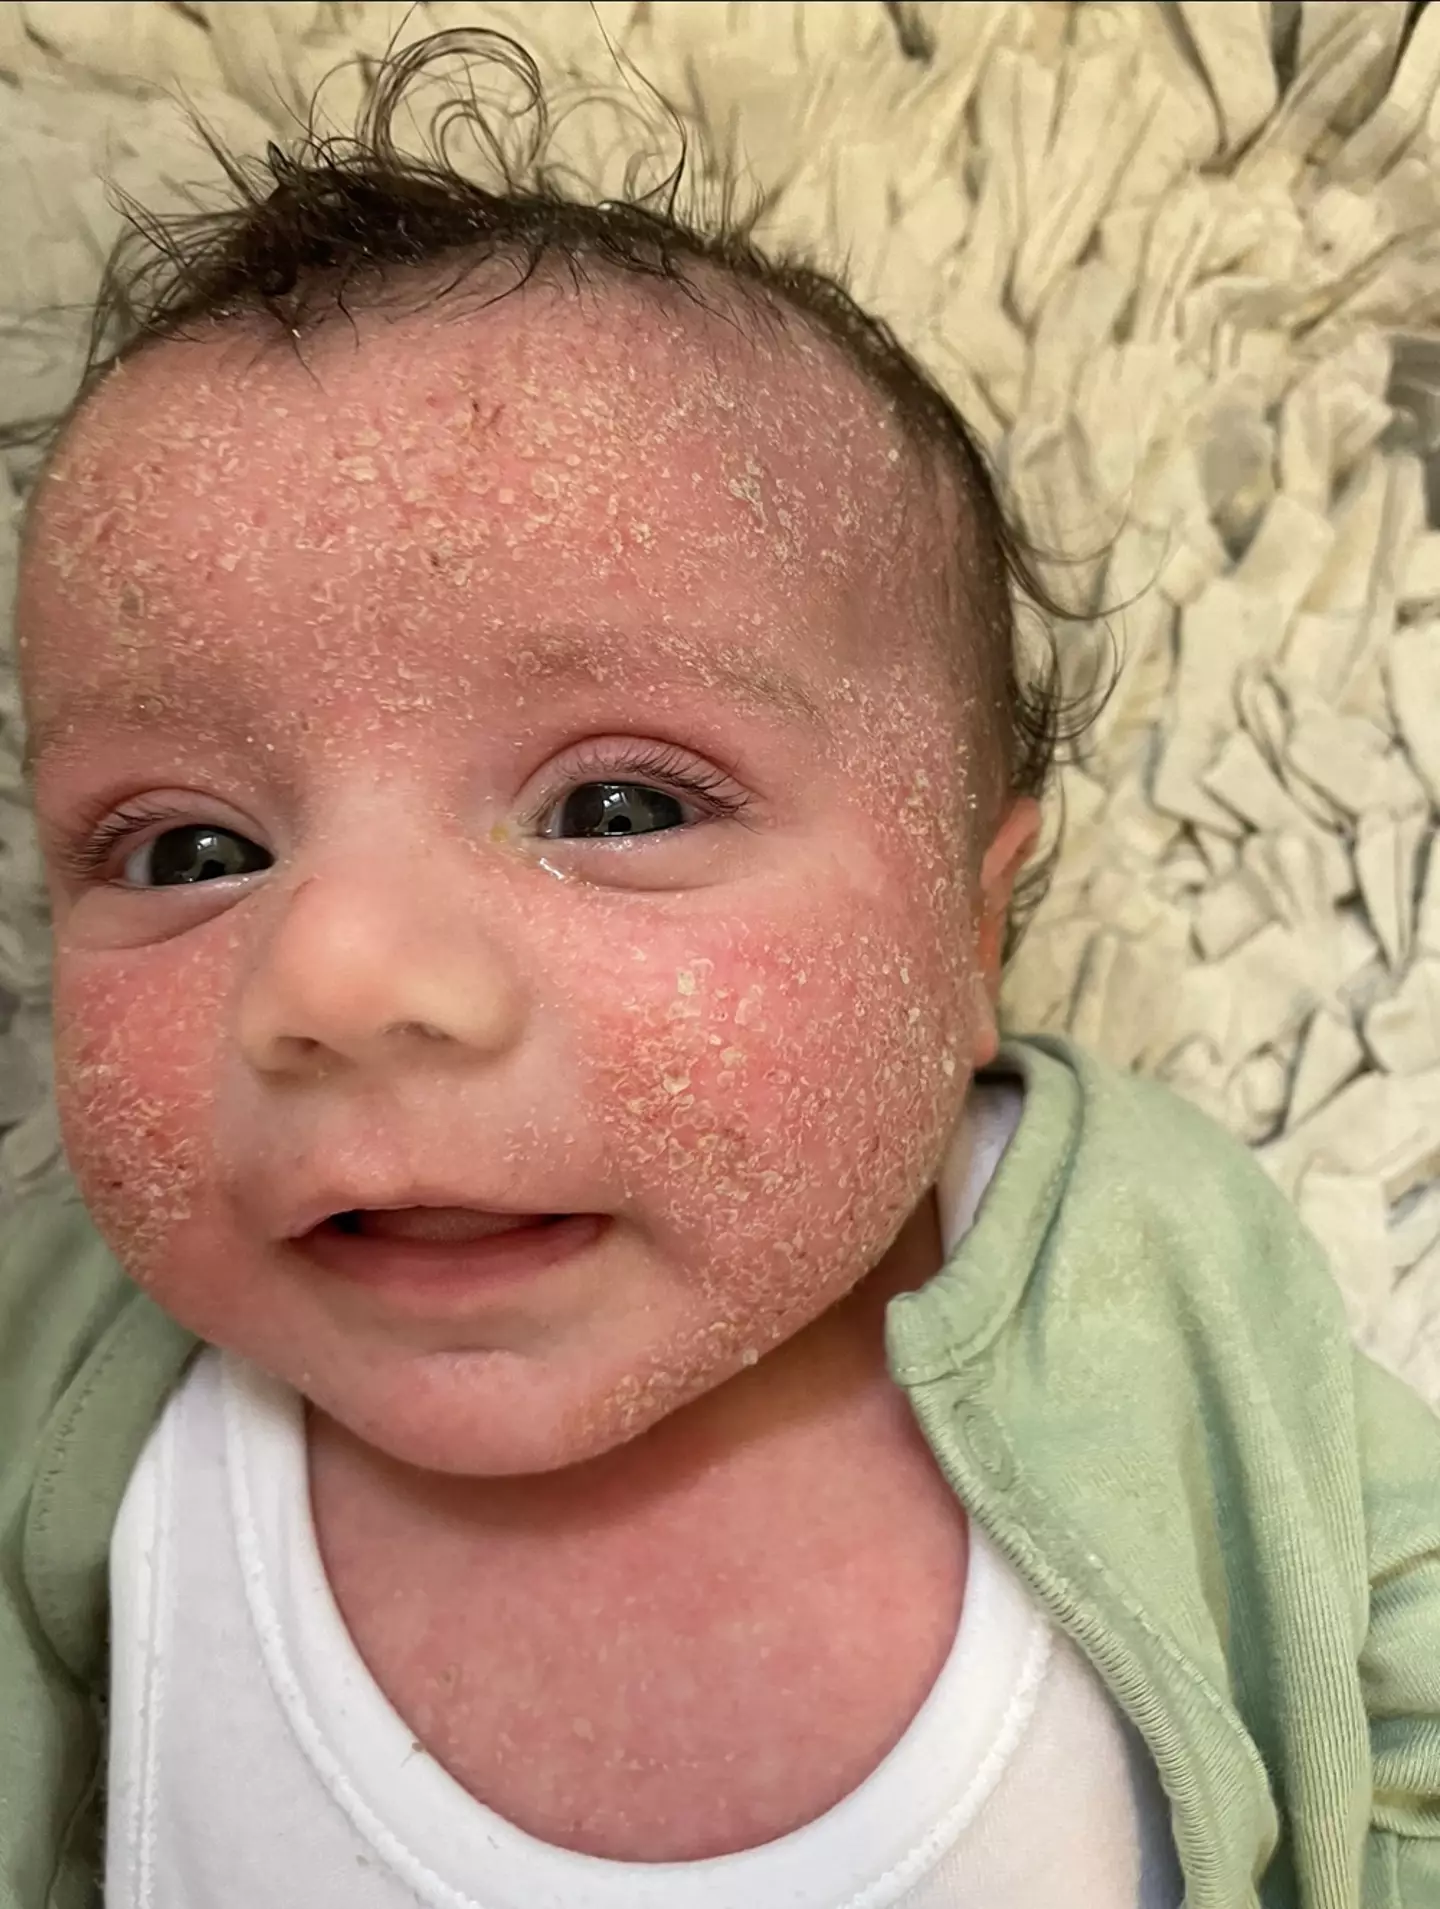 One mum was distraught after her three-month-old daughter developed severe eczema.